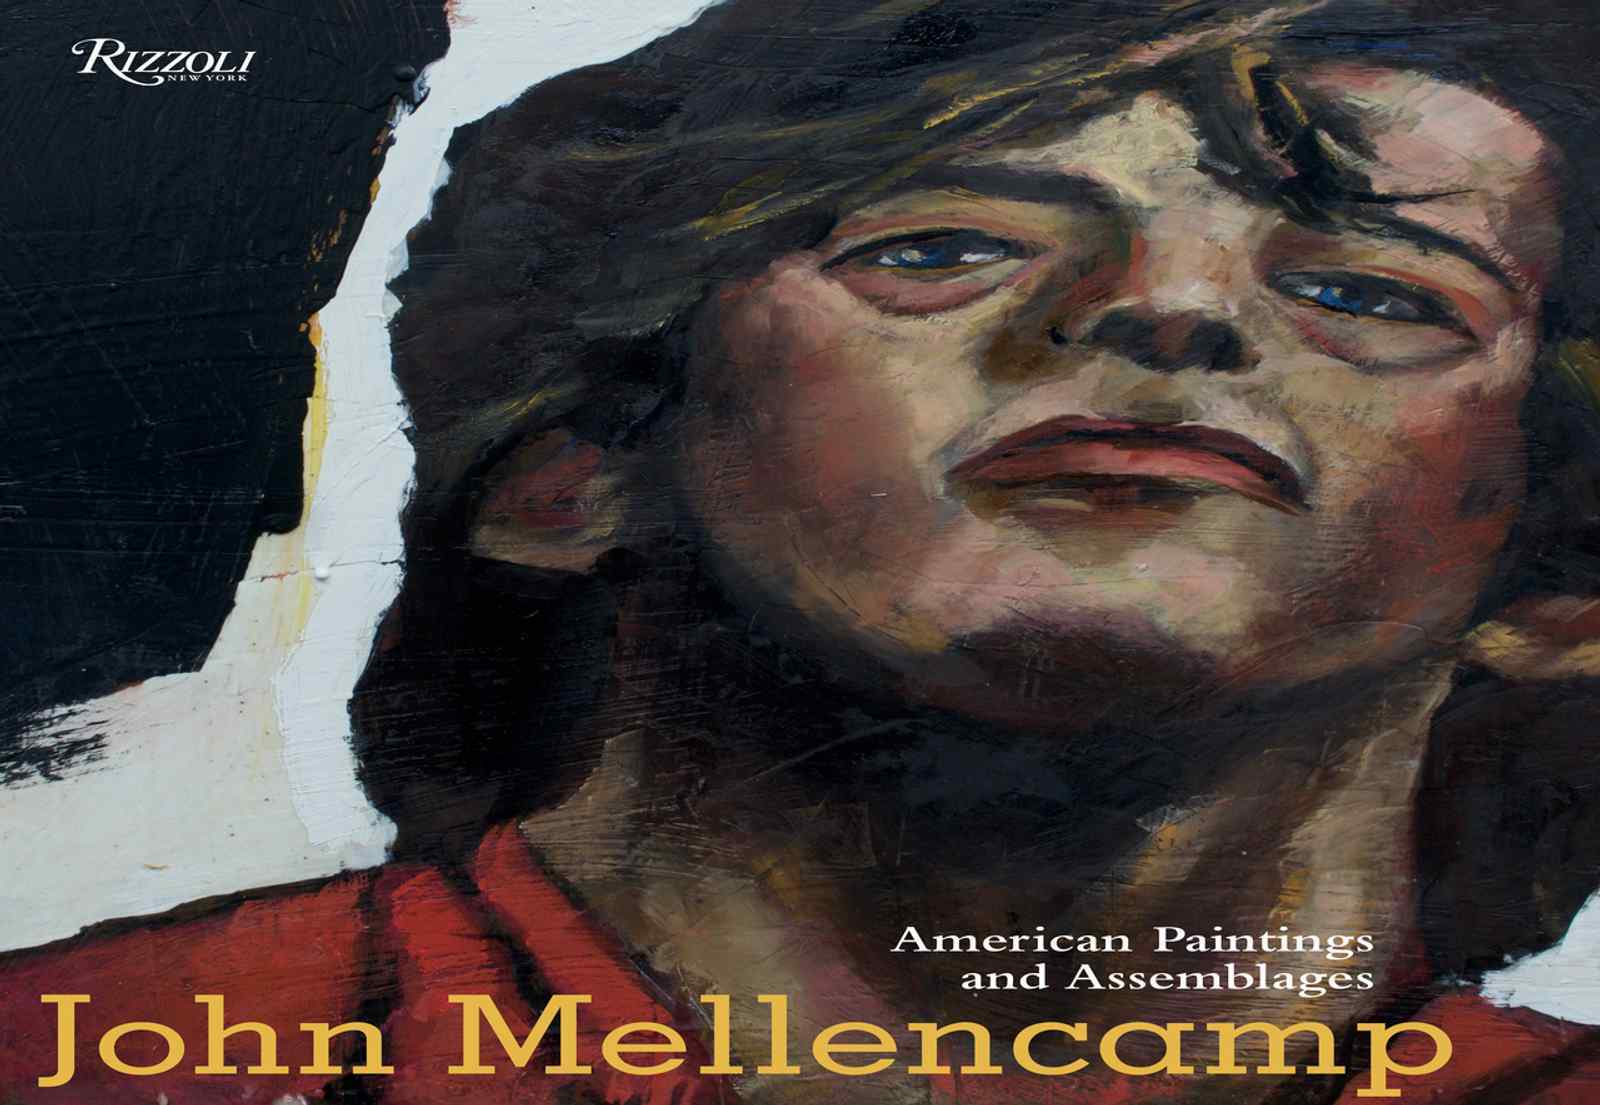 John Mellencamp: American Paintings and Assemblages Coffee Table Art Book Available Now